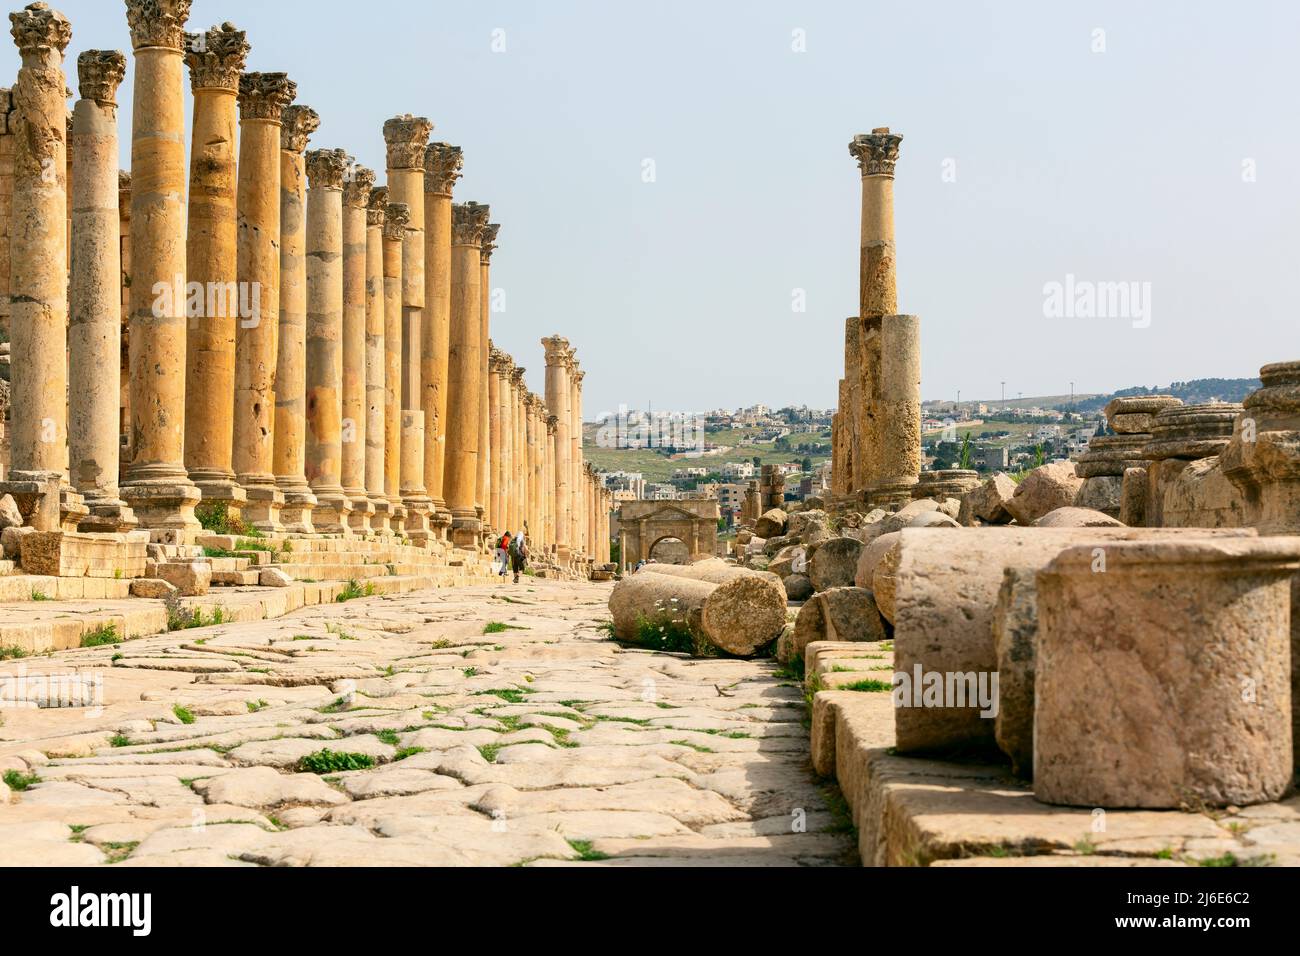 the architecture of the Roman Ruins of Jerash in the north of Amann in Jordan in the middle east. Jordan, Jerash, 2018 Stock Photo